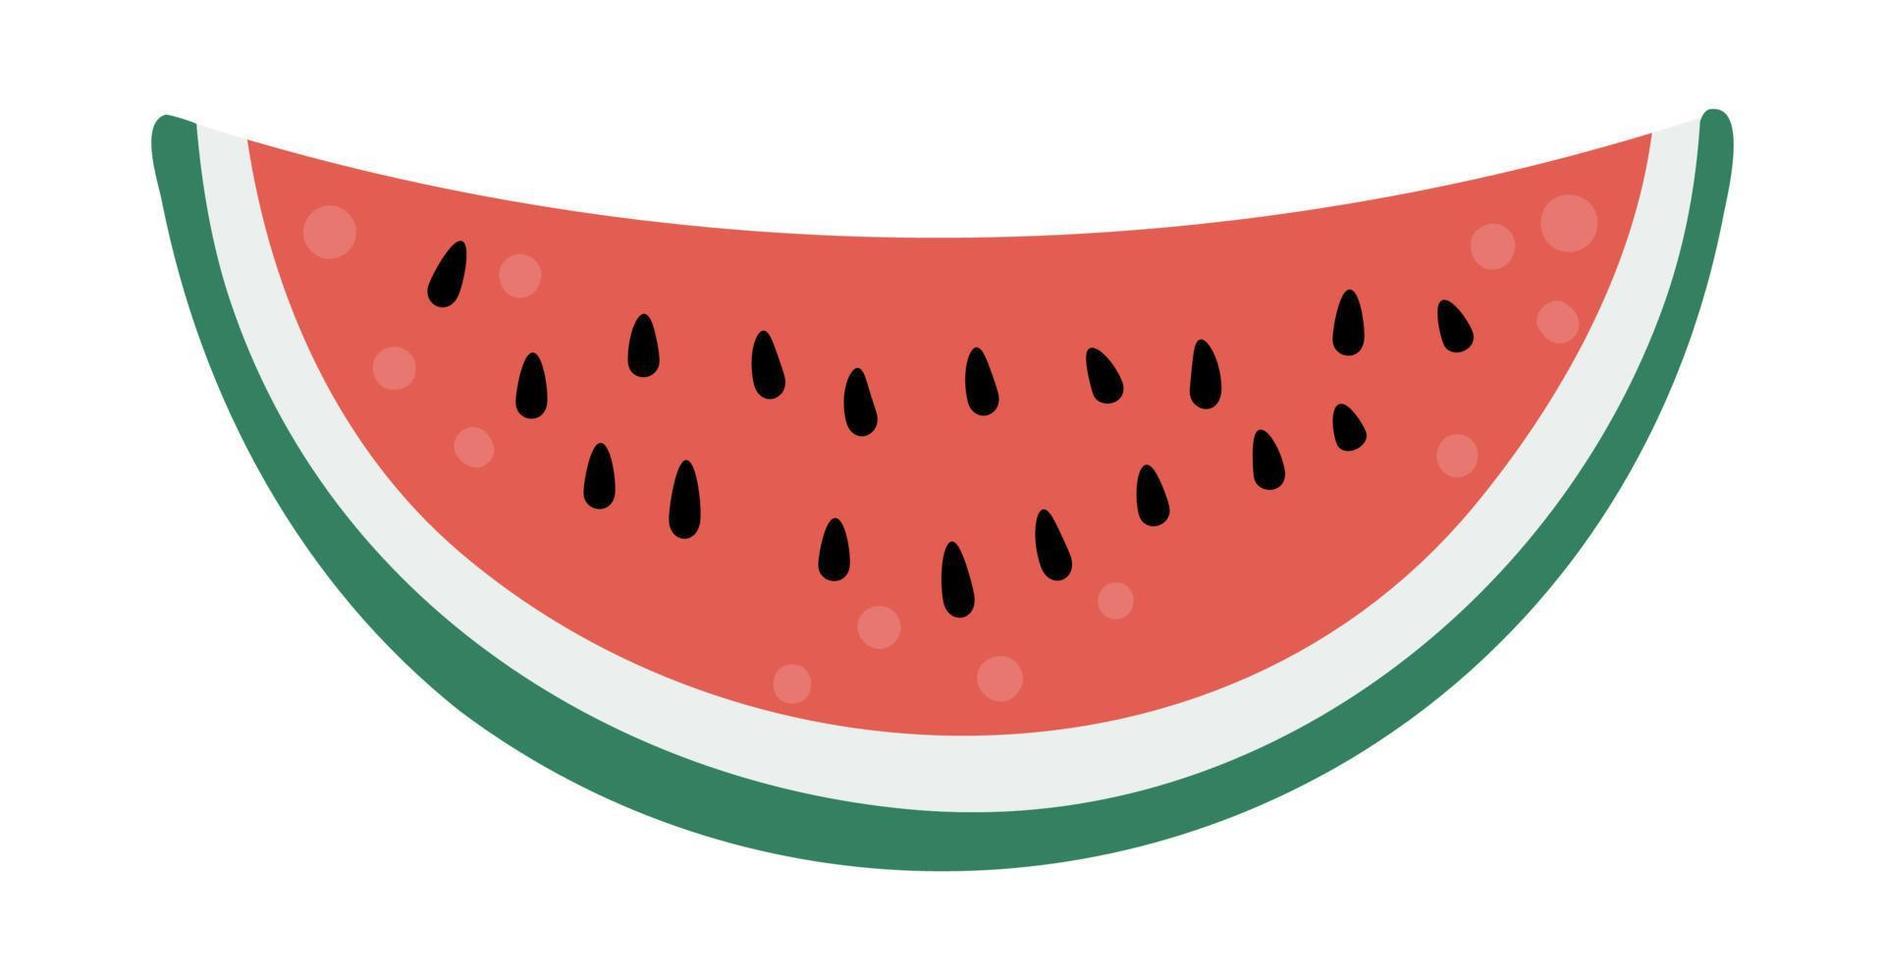 Vector watermelon clip art. Jungle fruit illustration. Hand drawn flat exotic plants isolated on white background. Bright childish healthy tropical summer food illustration.